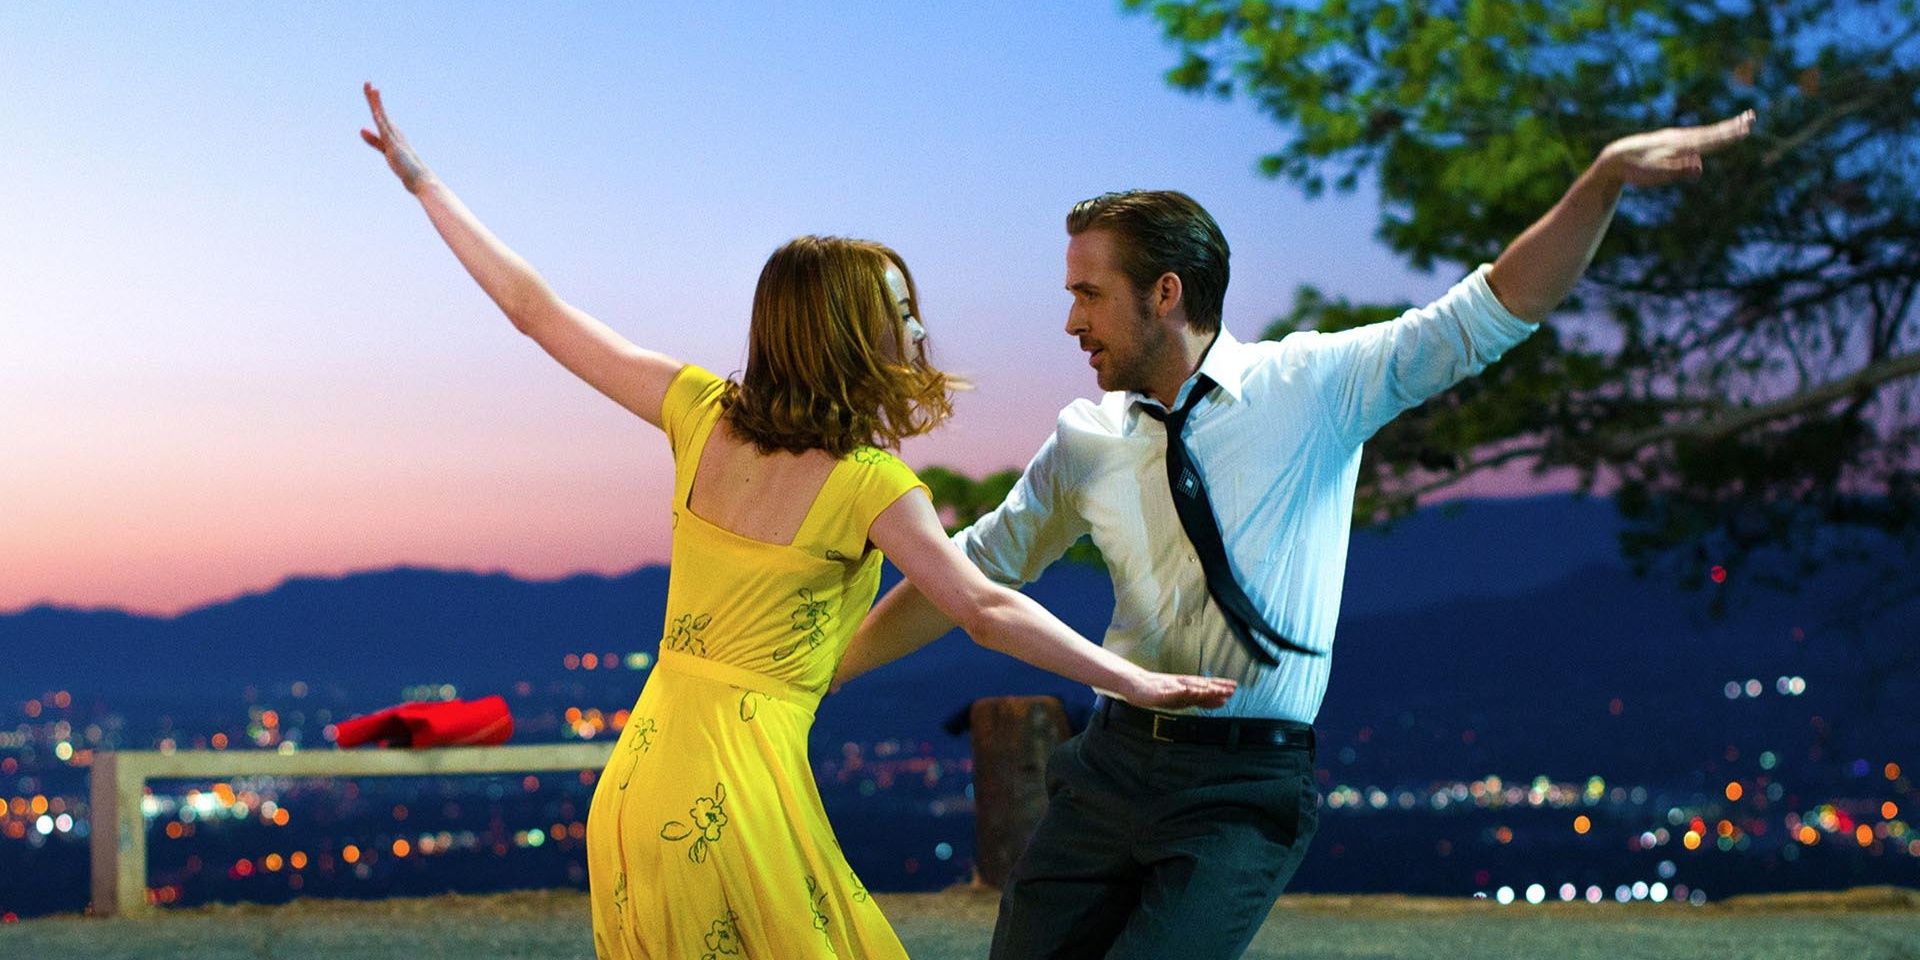 The 10 Best Movie Musicals Of All Time (According To Rotten Tomatoes)